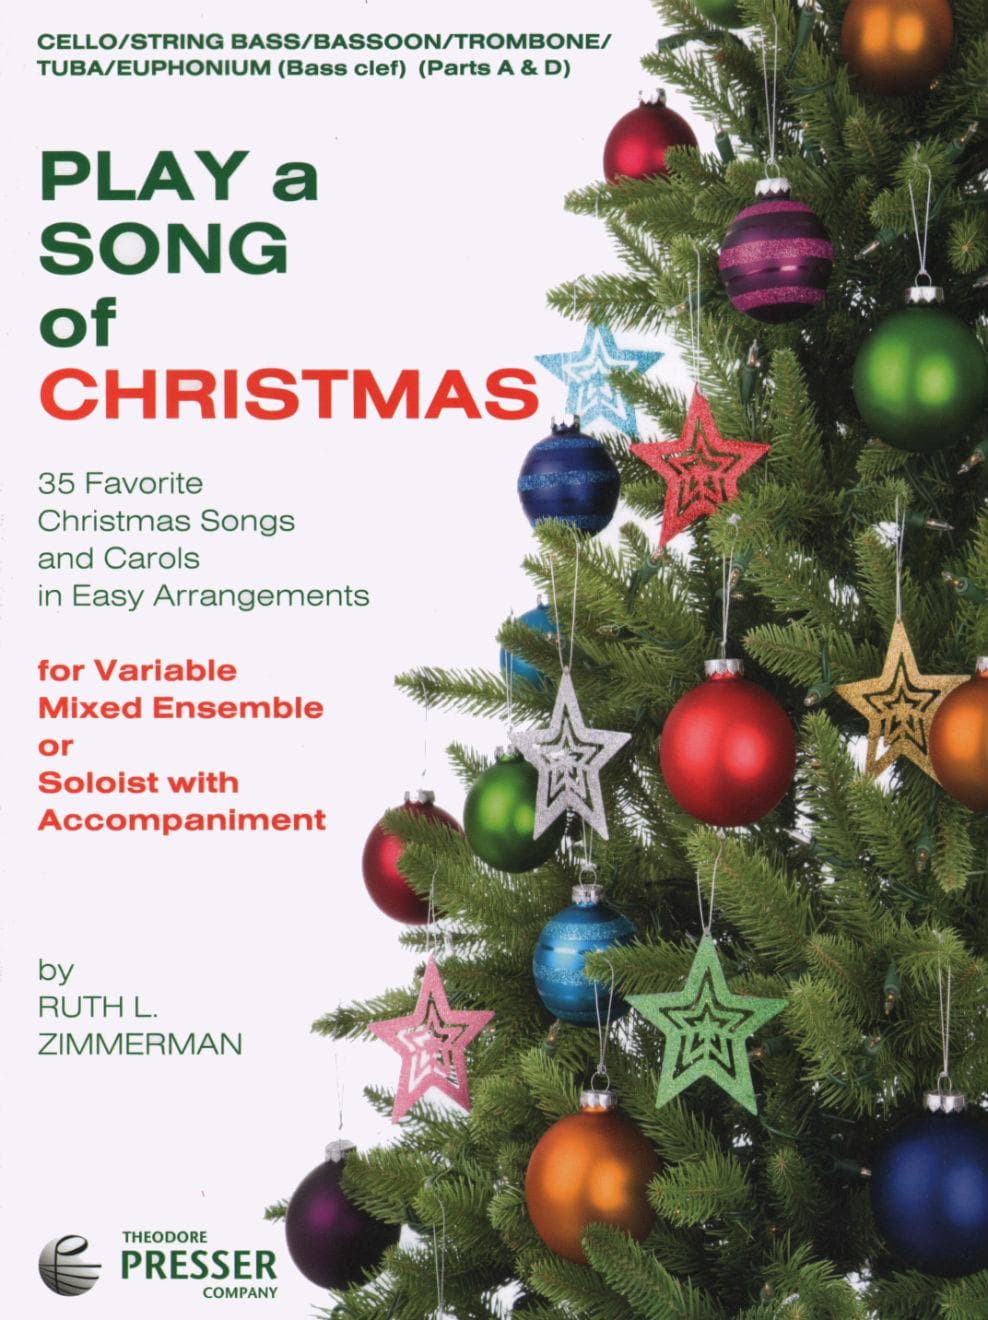 Zimmerman, Ruth L - Play a Song of Christmas, for Cello Published by Theodore Presser Company